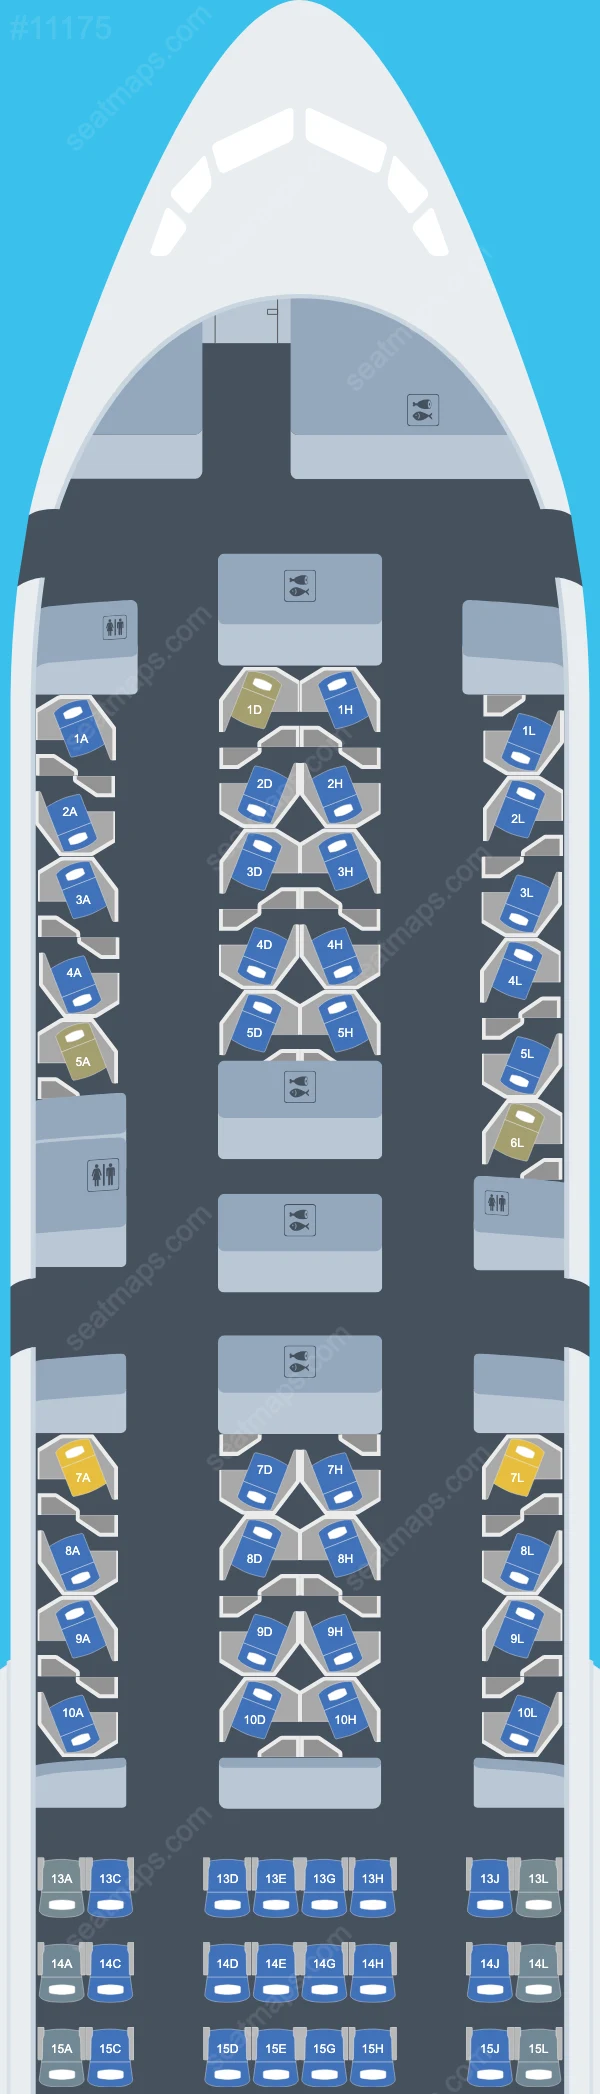 American Airlines Boeing 777 Seat Maps 777-200 ER V.2